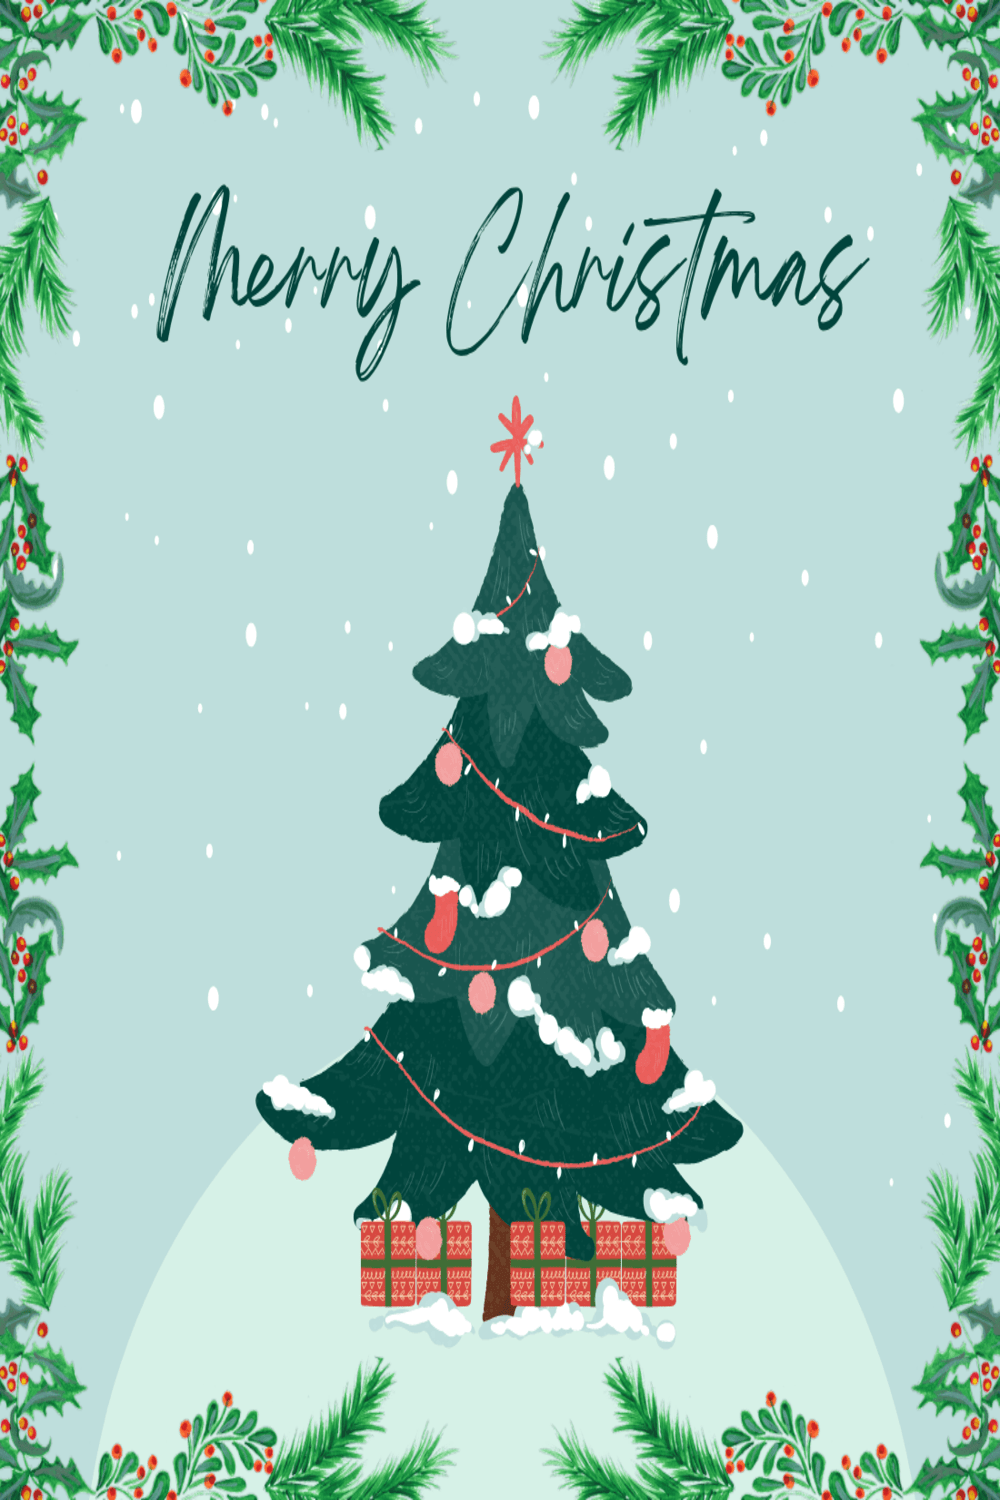 Merry Christmas Templates and Stickers pinterest image.